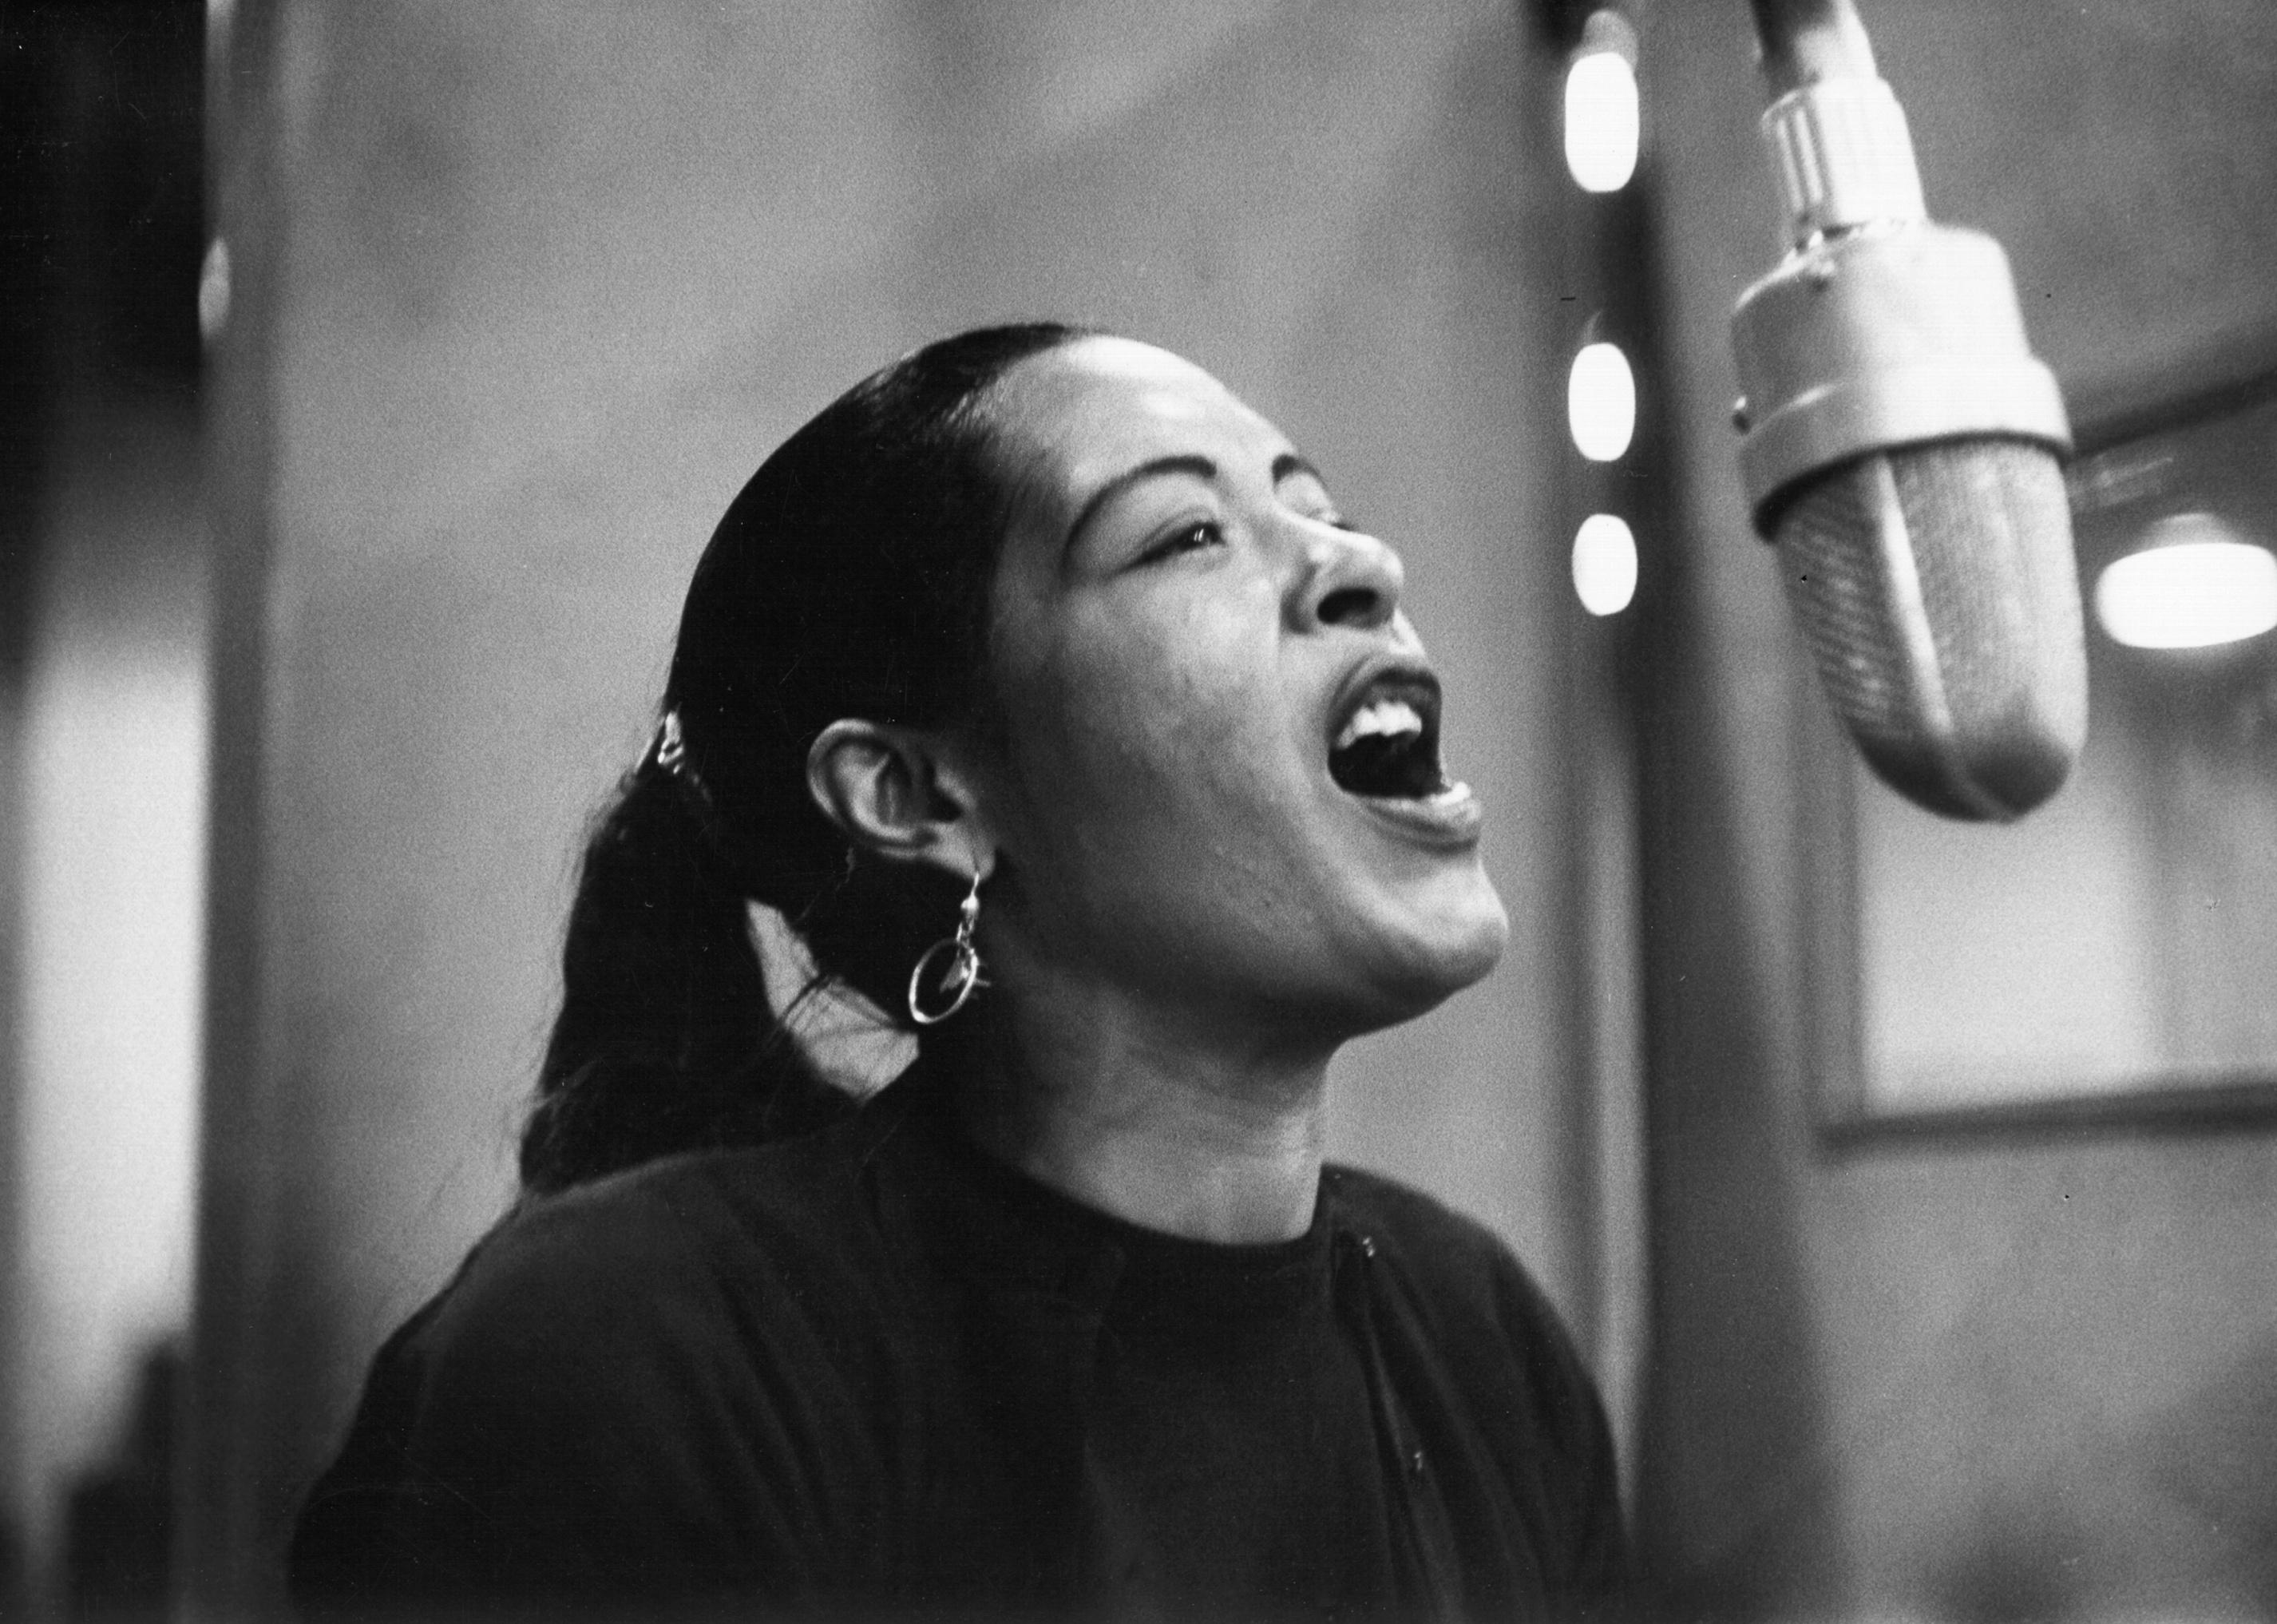 Billie Holiday records her penultimate album 'Lady in Satin at the Columbia Records studio.